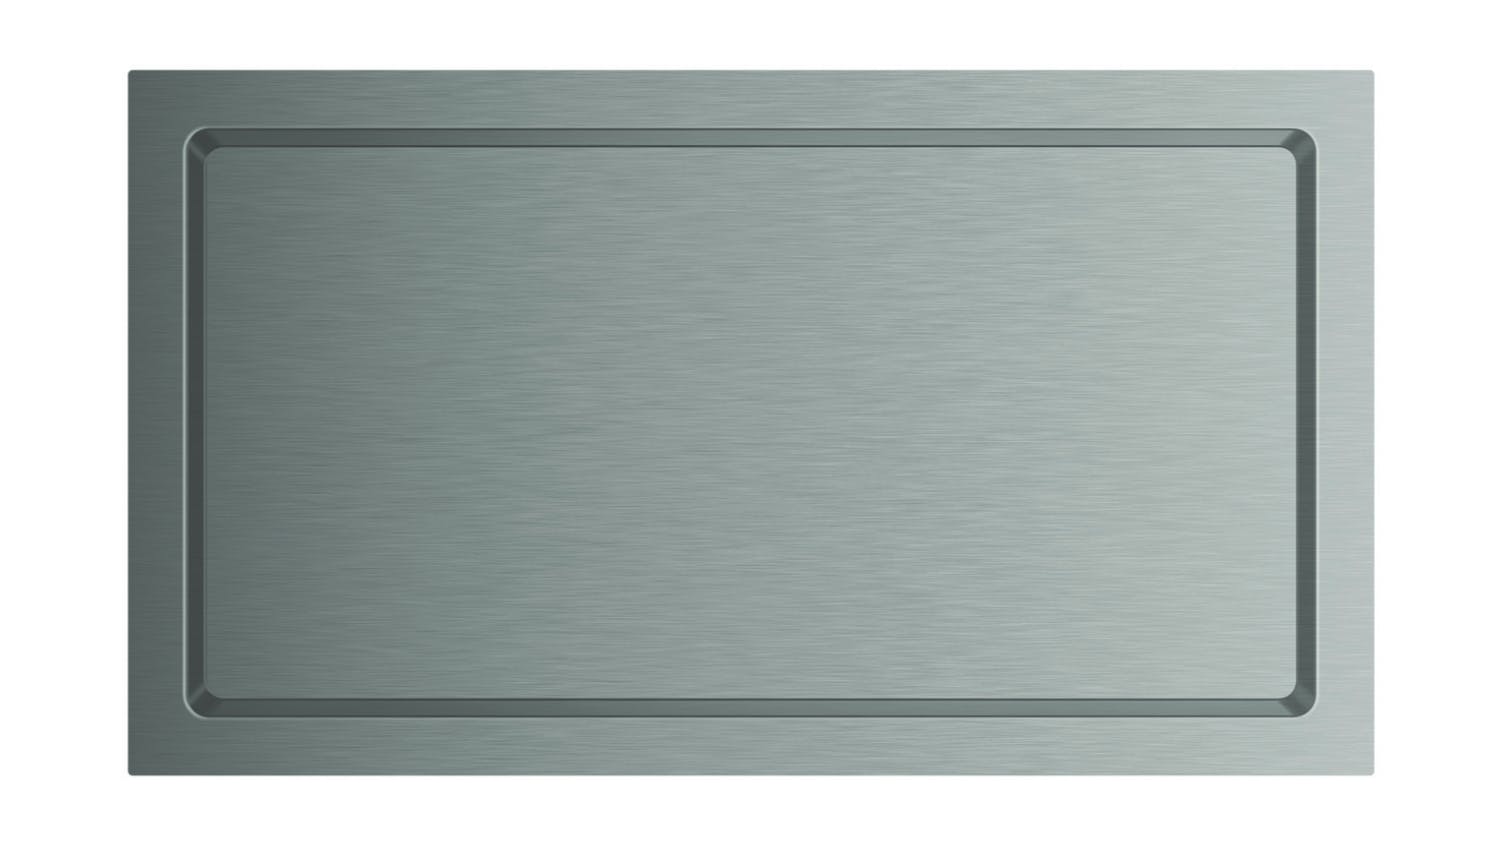 Fisher & Paykel 30cm Auxiliary Modular Teppanyaki Cooktop - Stainless Steel (Series 11/CIT302DX1)